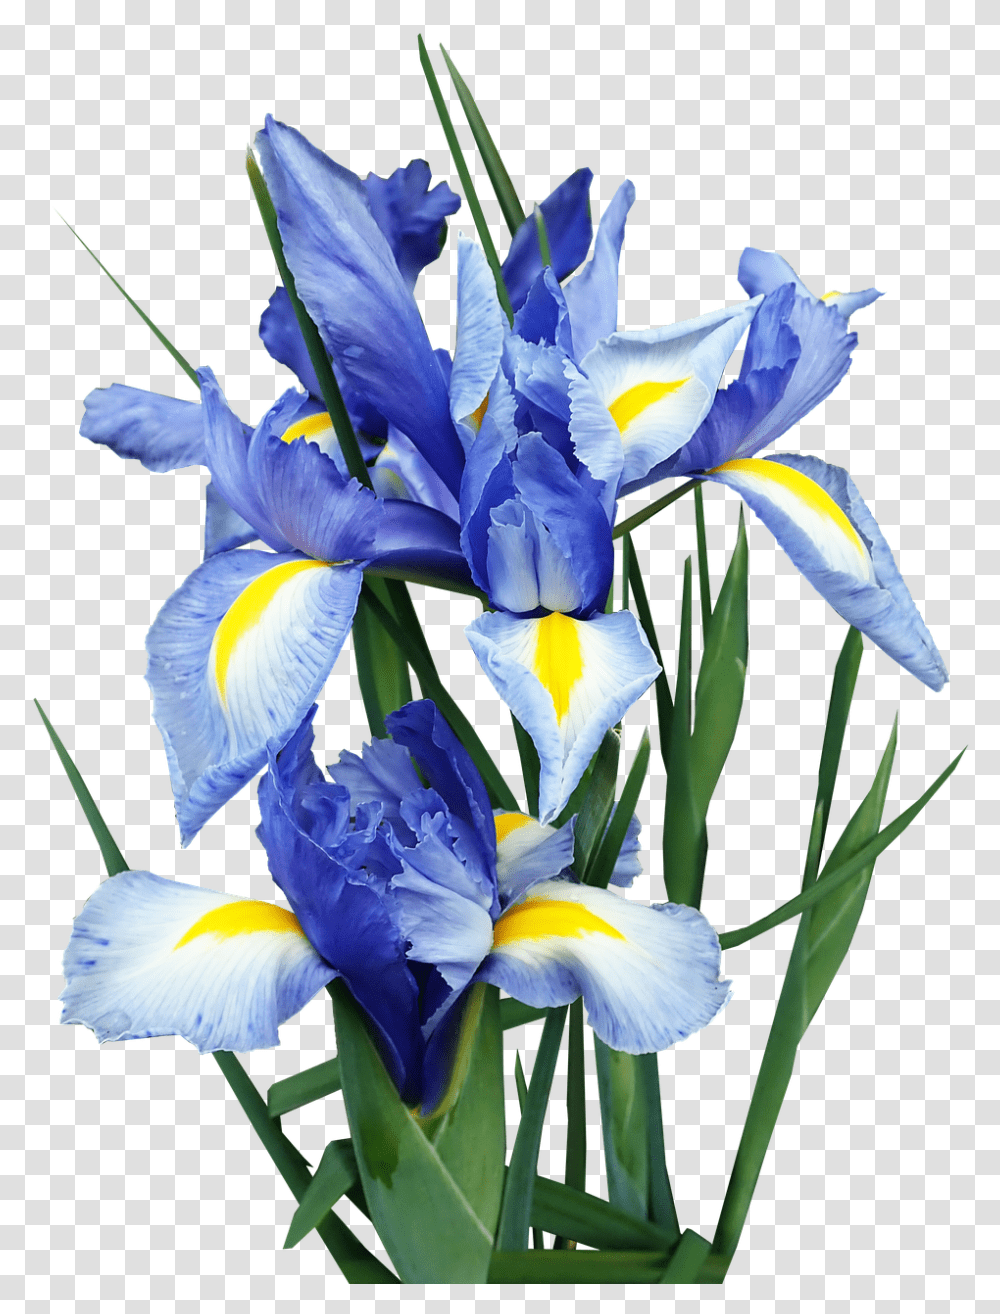 Iris Dutch Blue Flowers Bulbs Cut Out Isolated Algerian Iris, Plant, Blossom, Petal, Anther Transparent Png